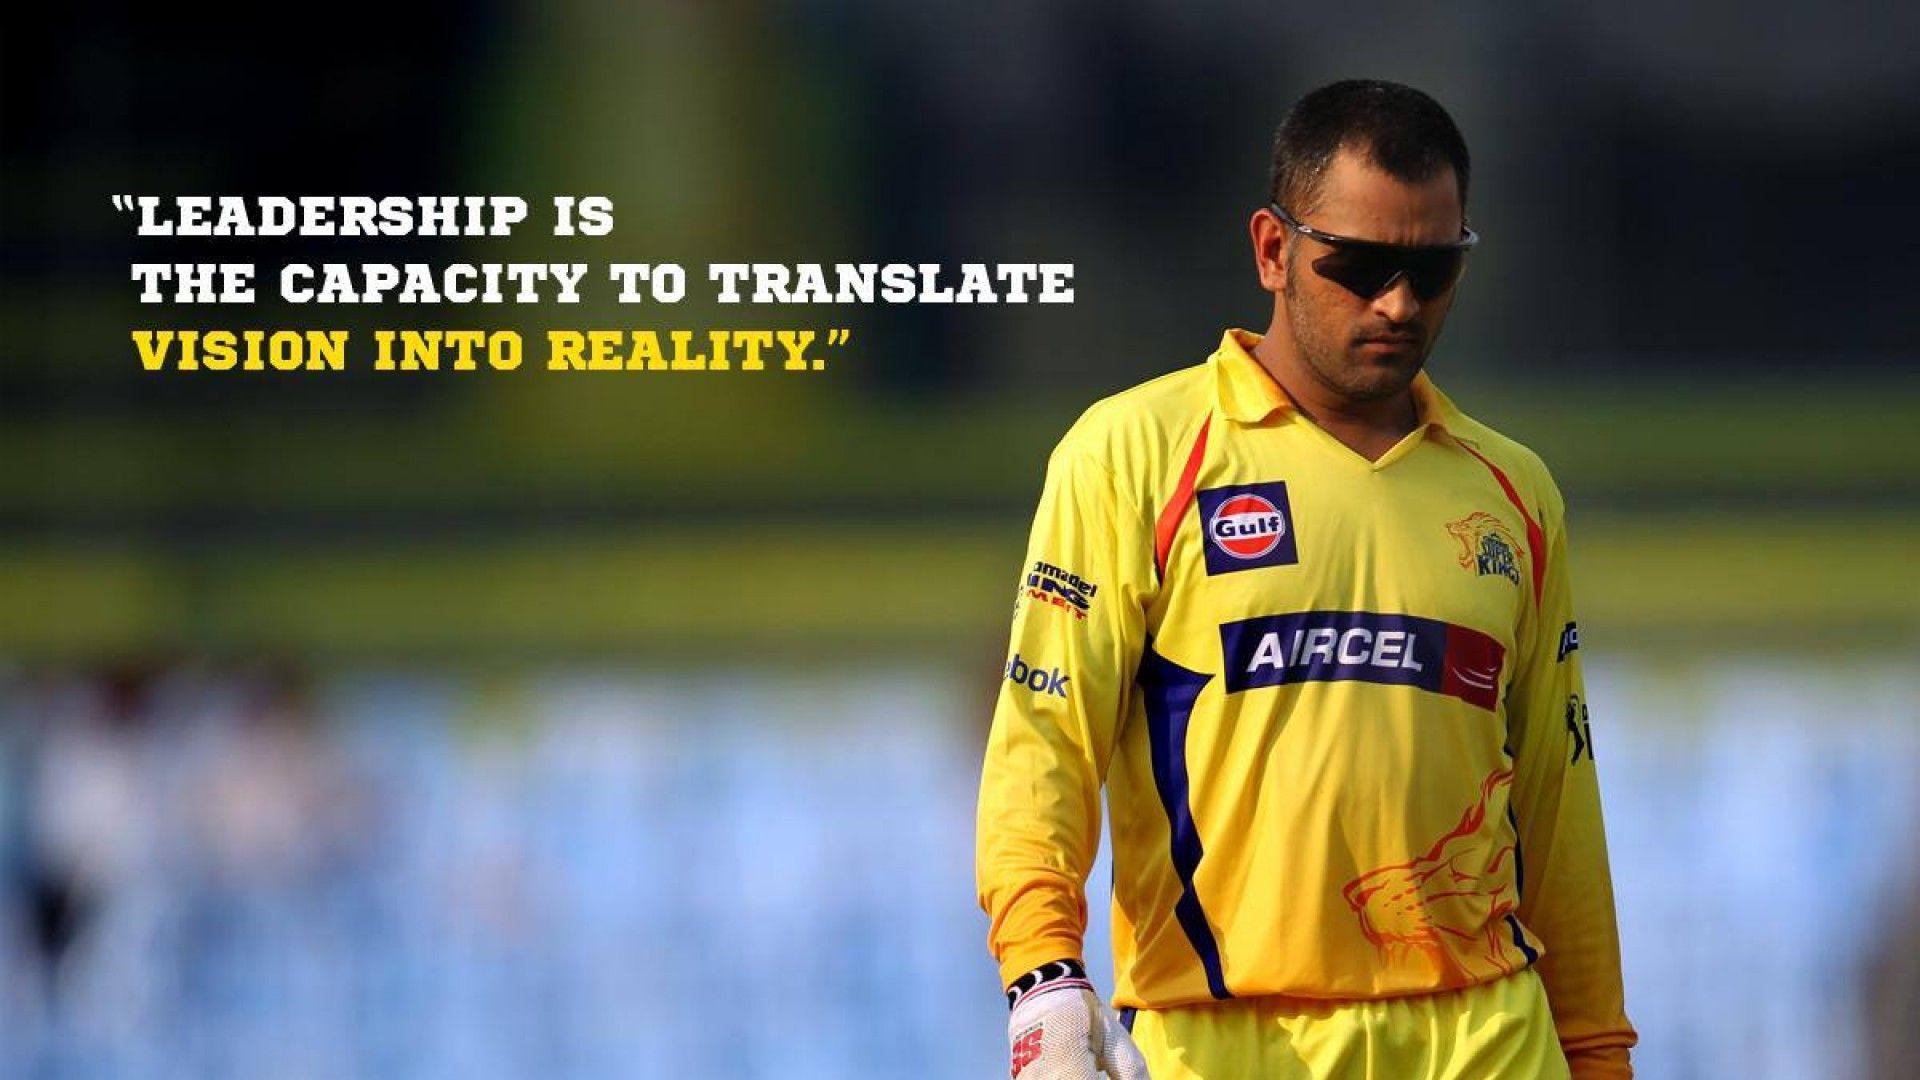 Top Mahendra Singh Dhoni HD Wallpaper Image And Latest Photo. Dhoni quotes, 10th quotes, Ms dhoni photo